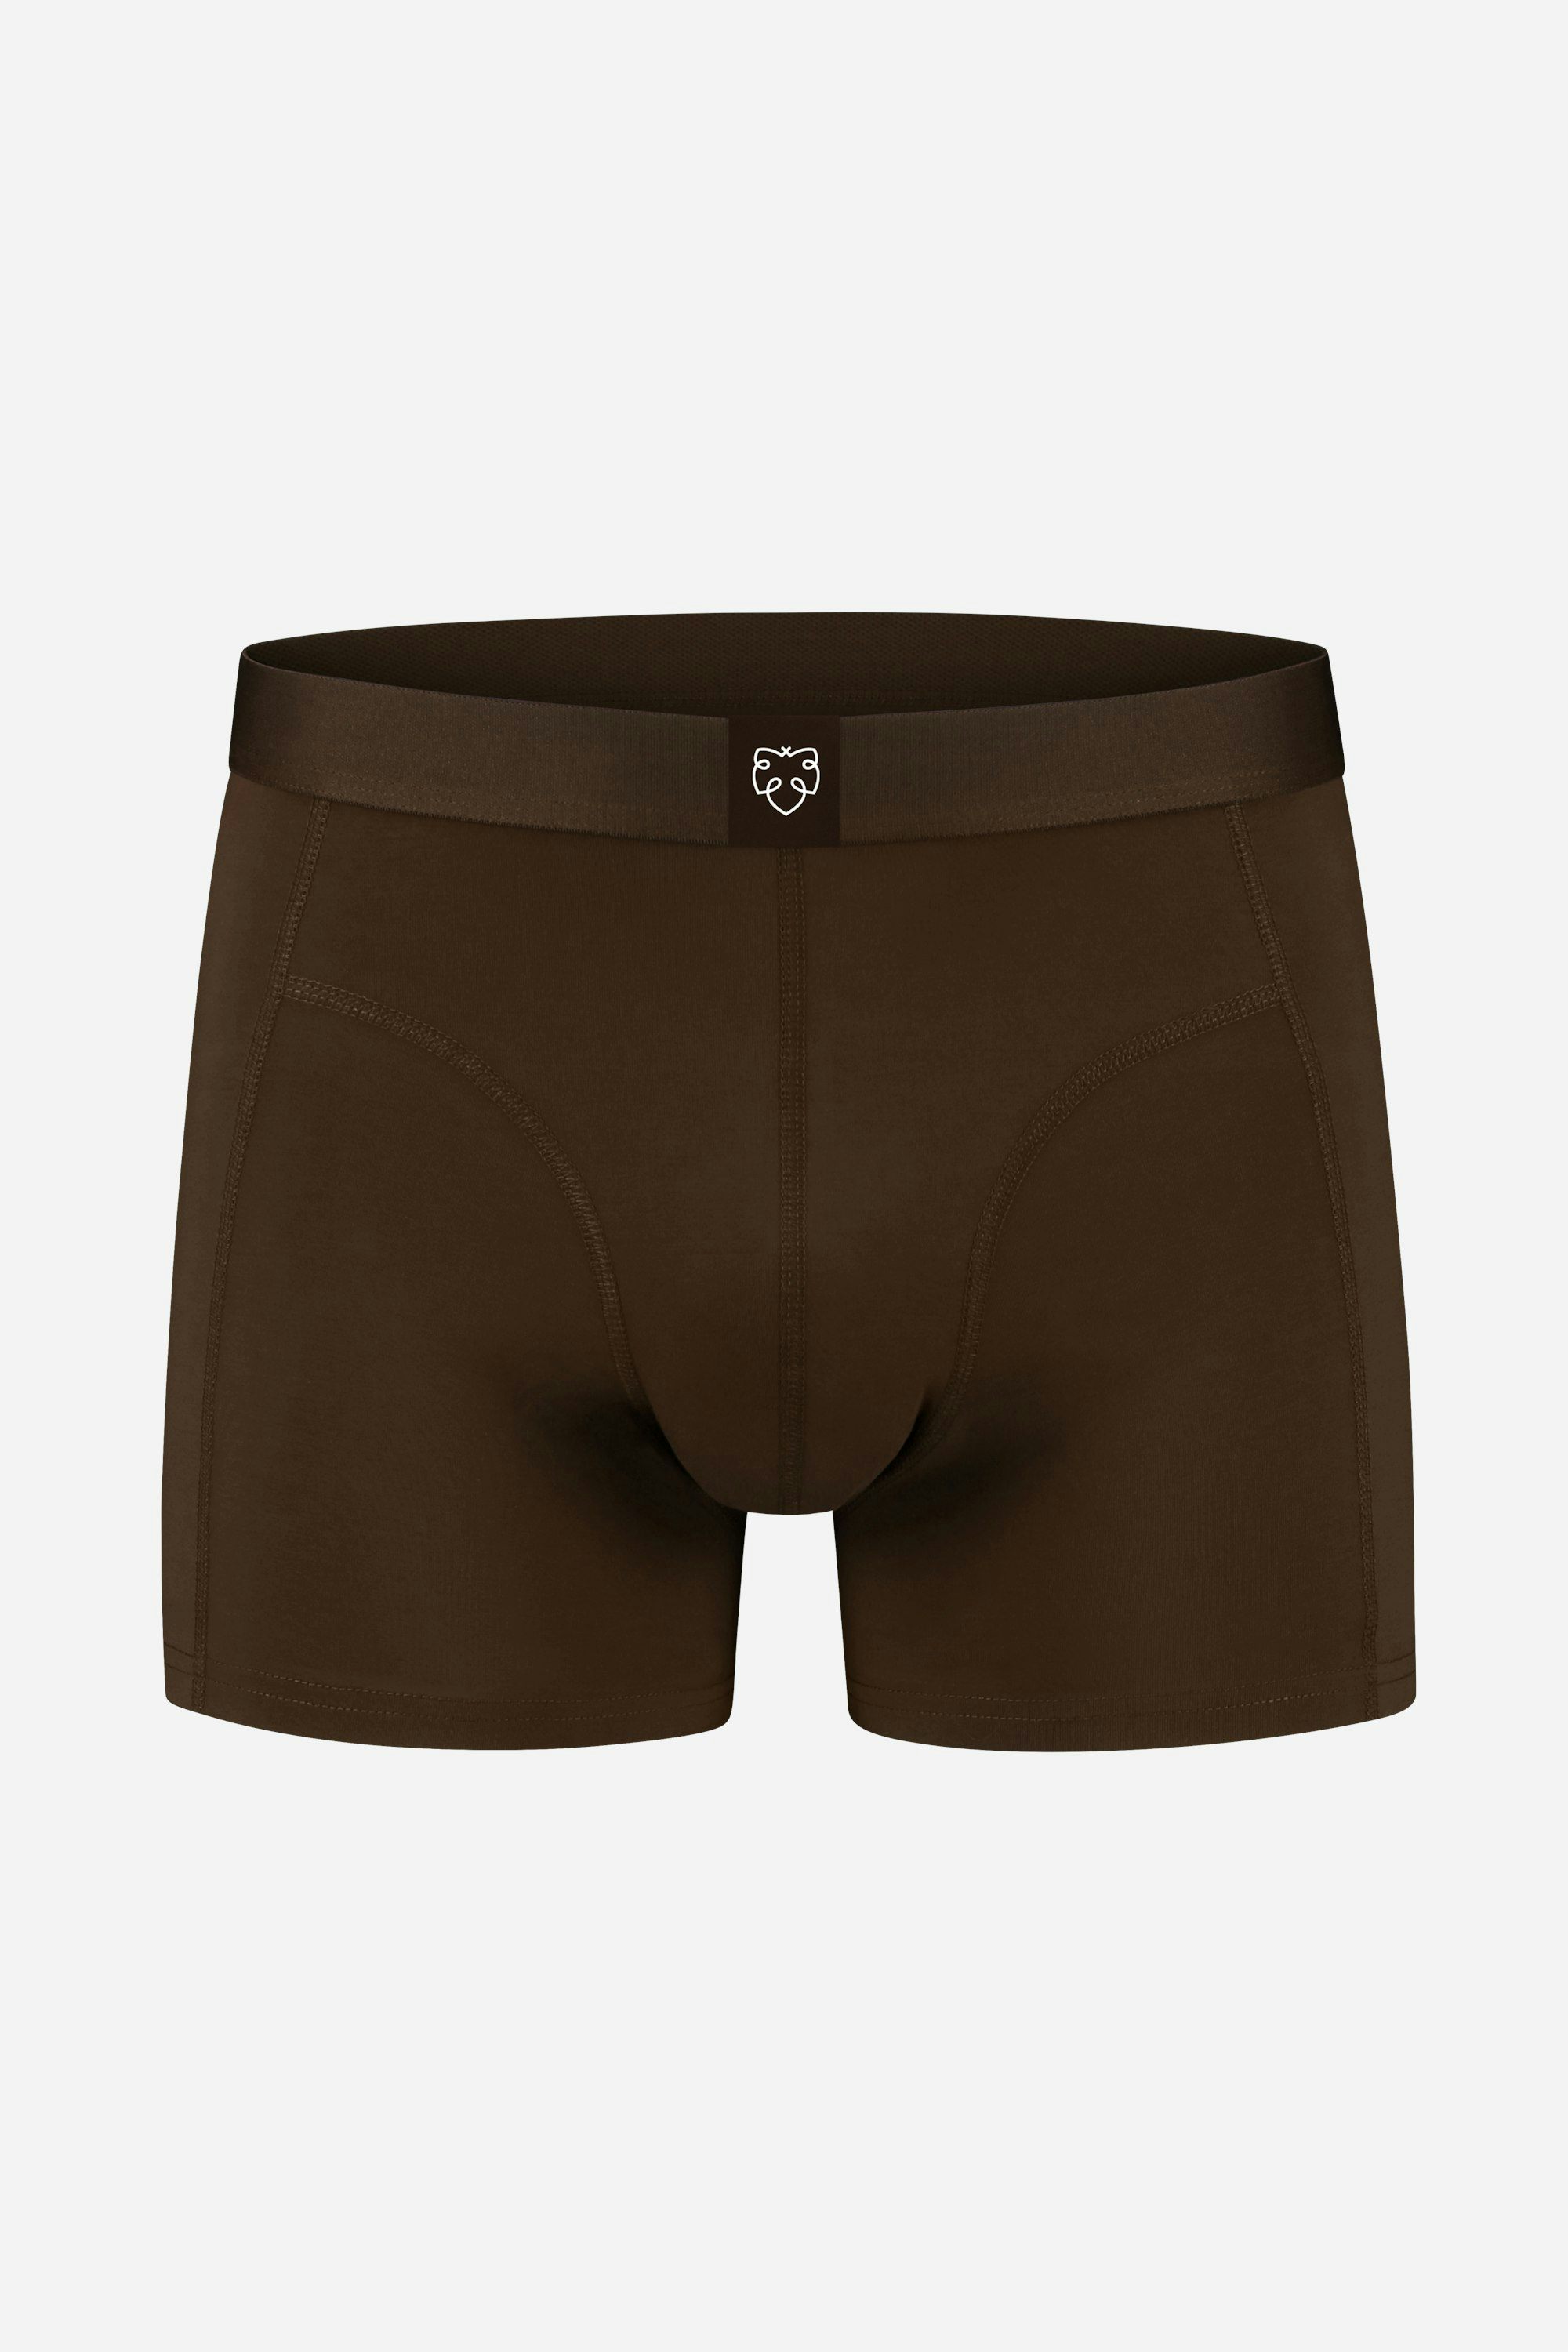 A-dam brown Boxer Brief from organic cotton